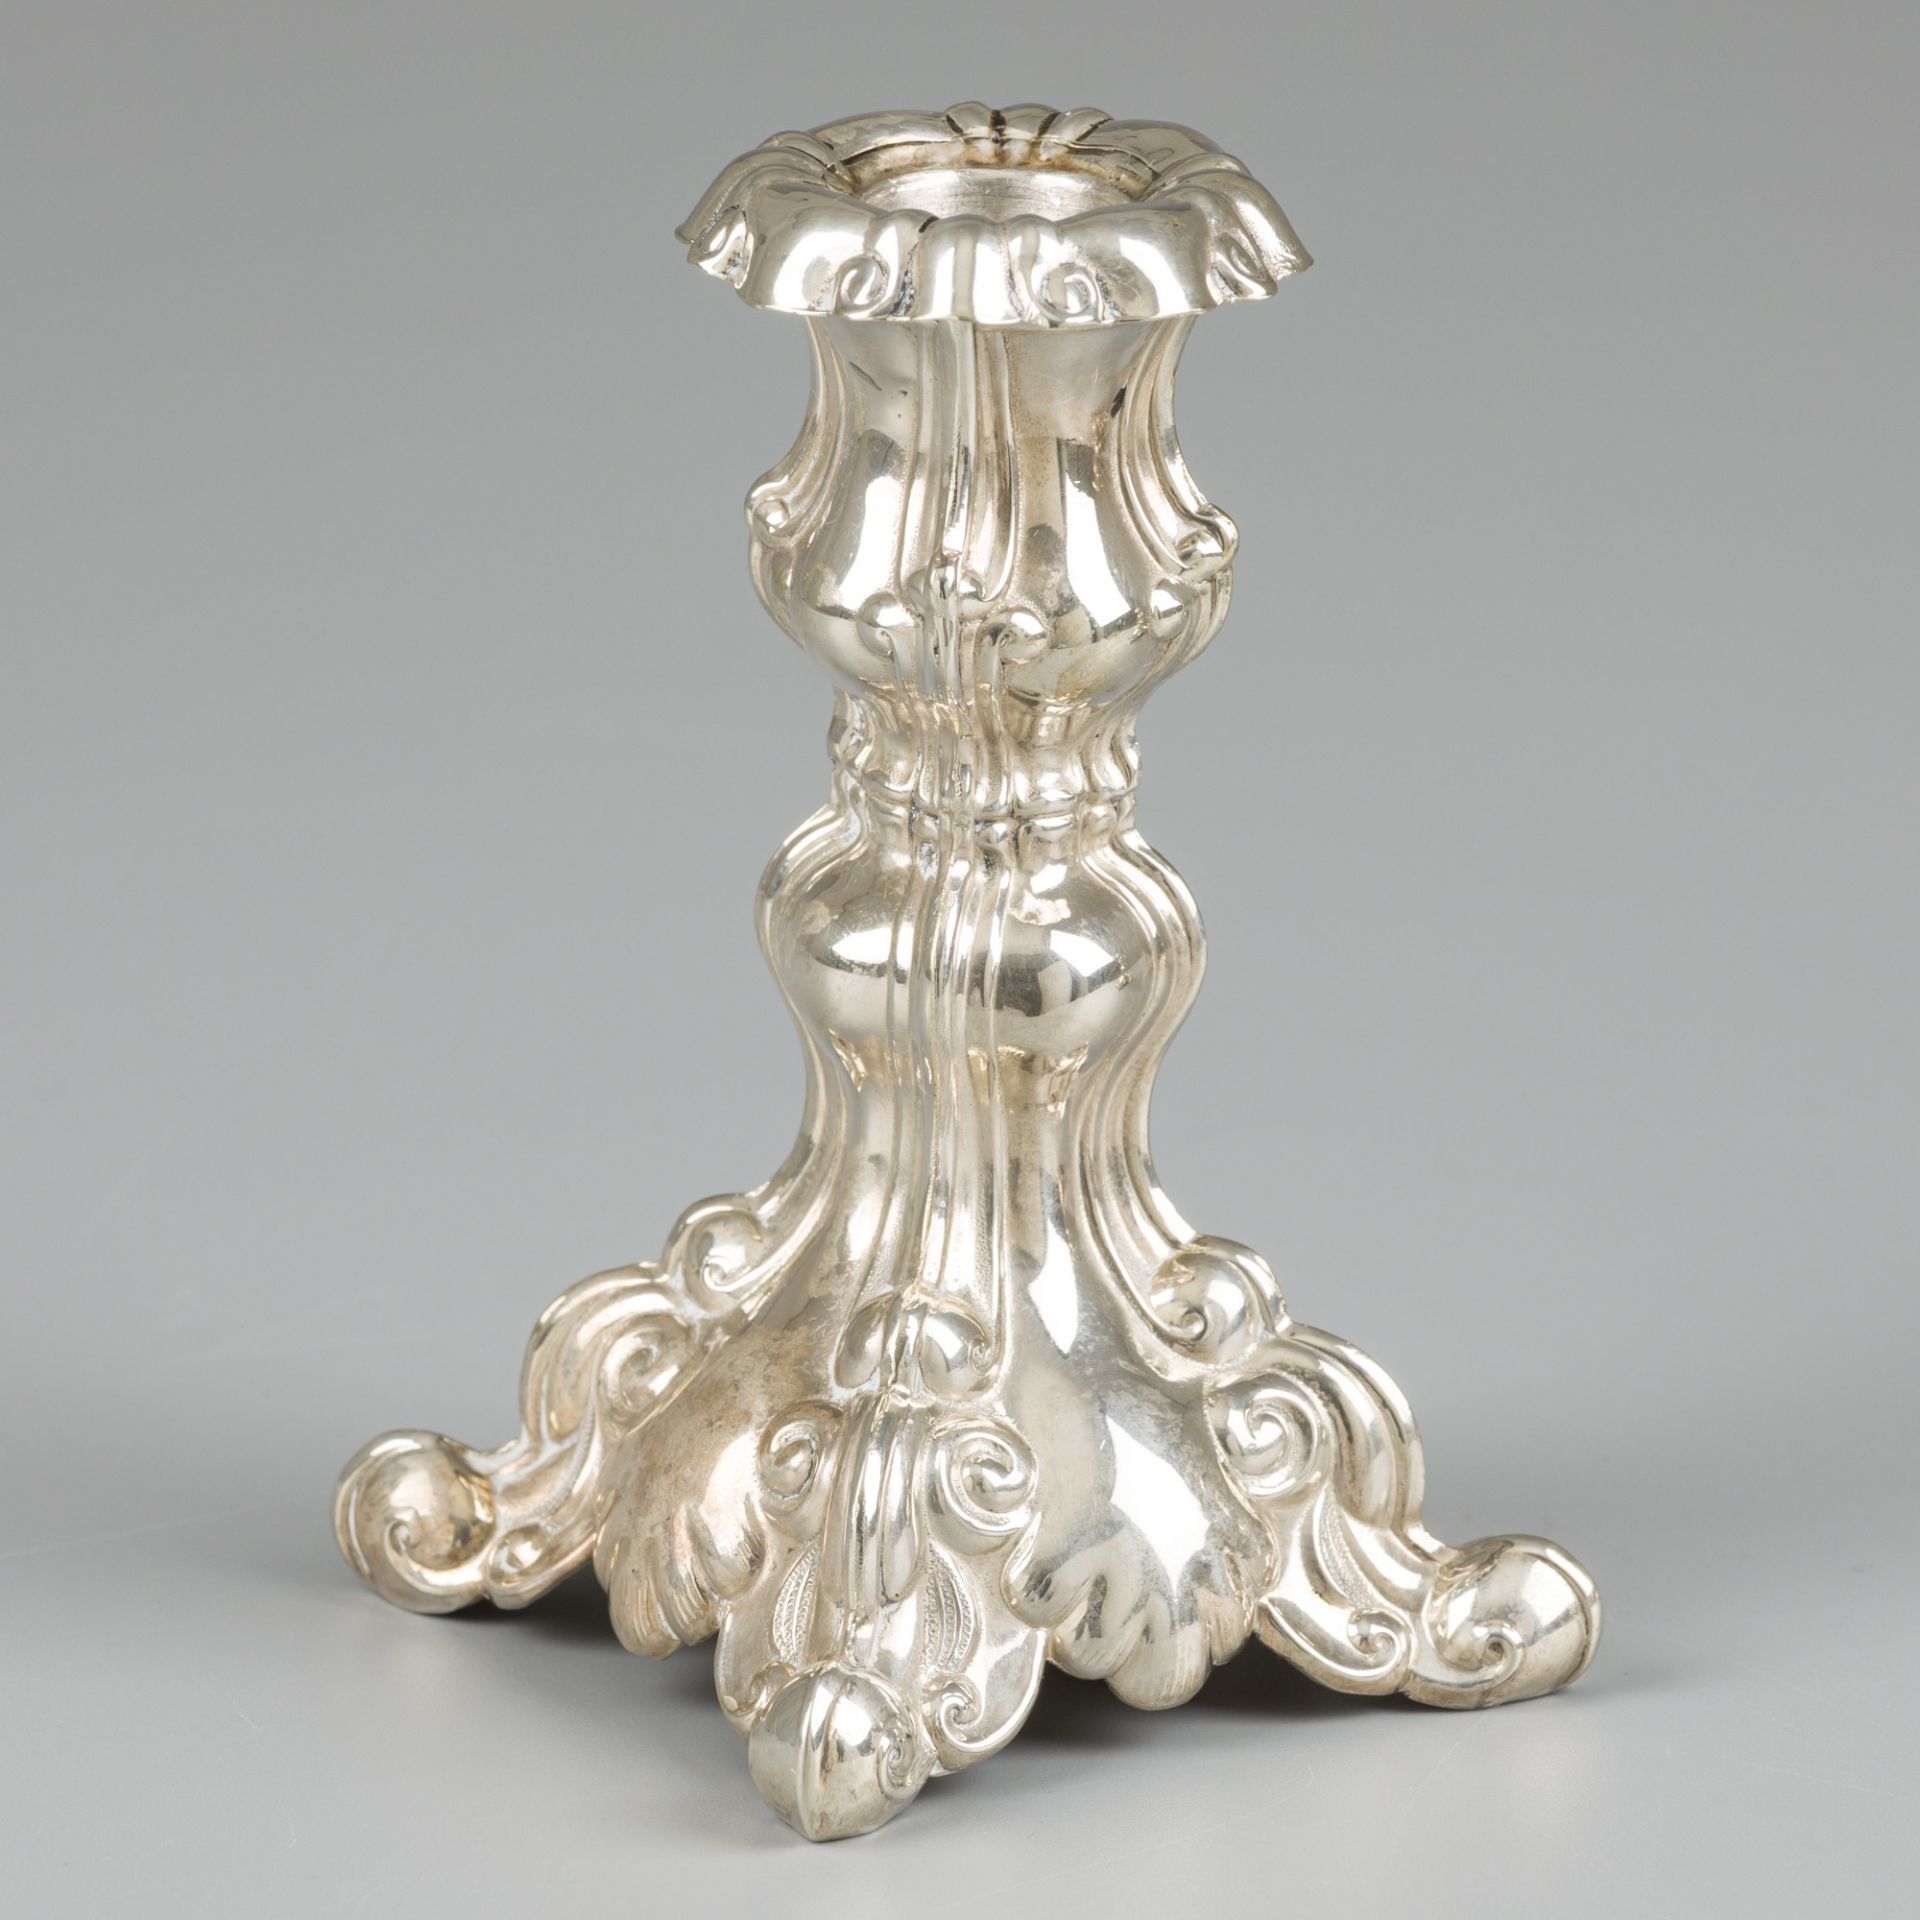 2-piece set of silver candlesticks. - Image 3 of 5